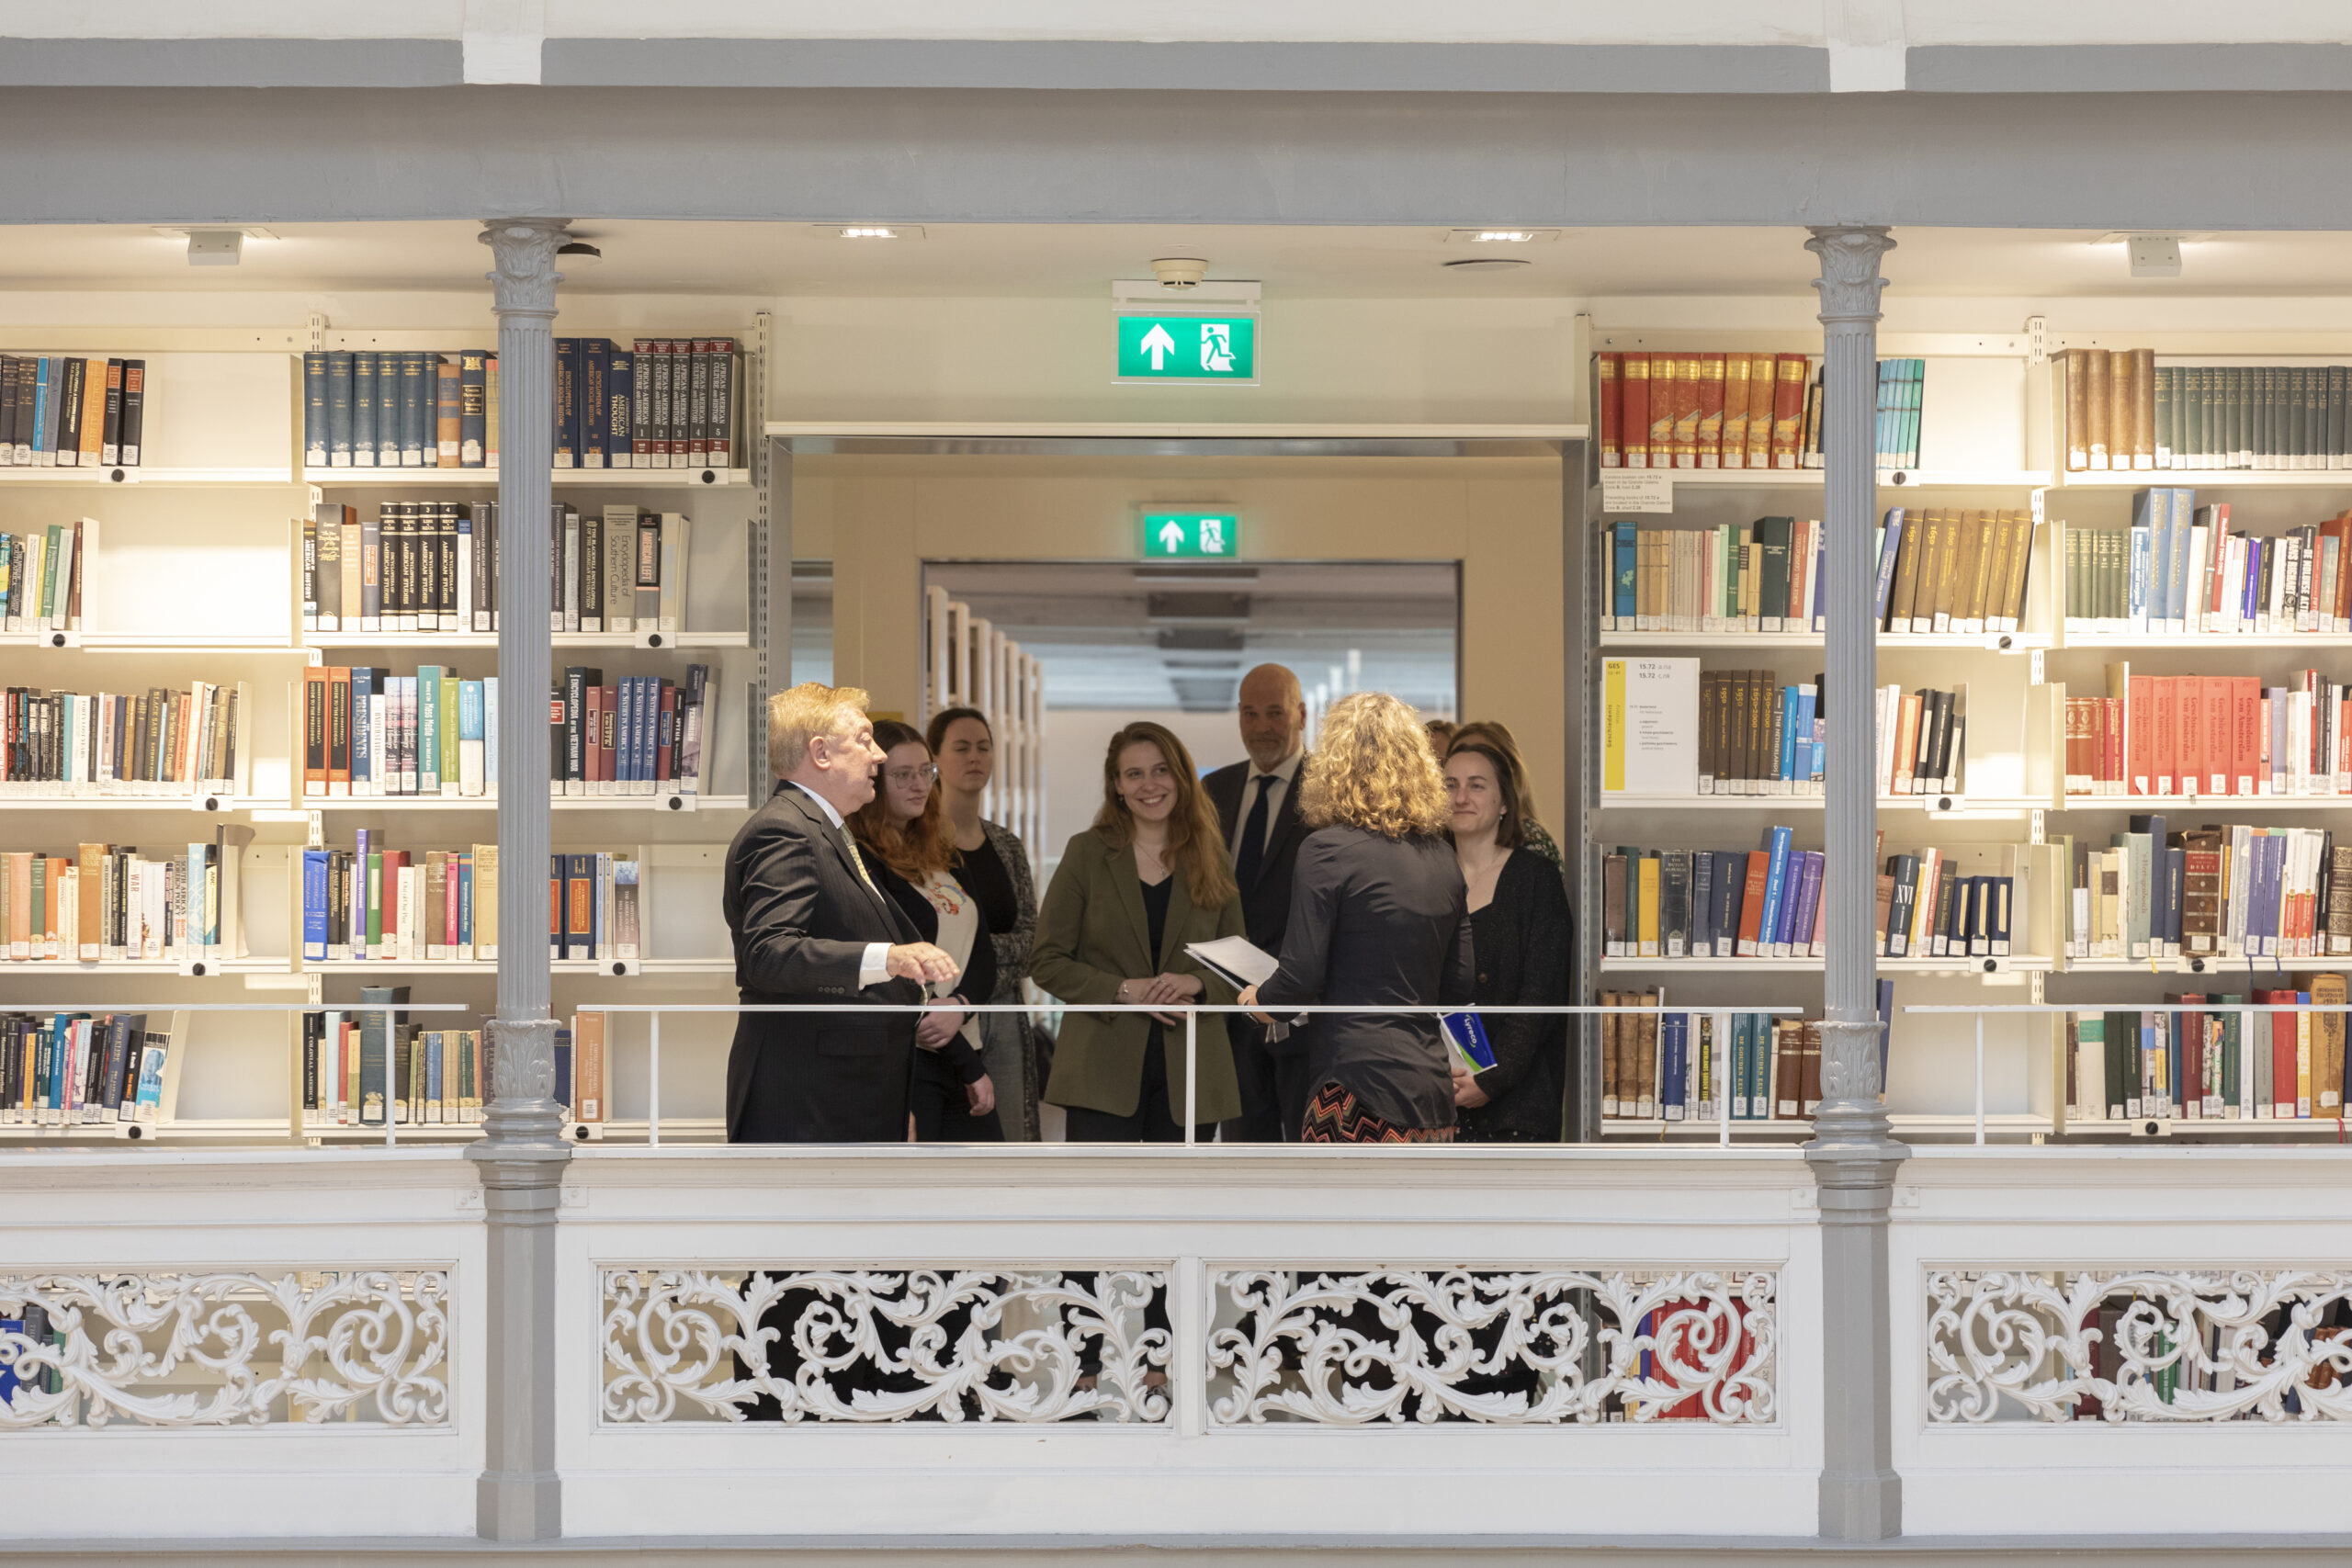 People standing on a balcony surrounded by bookshelves